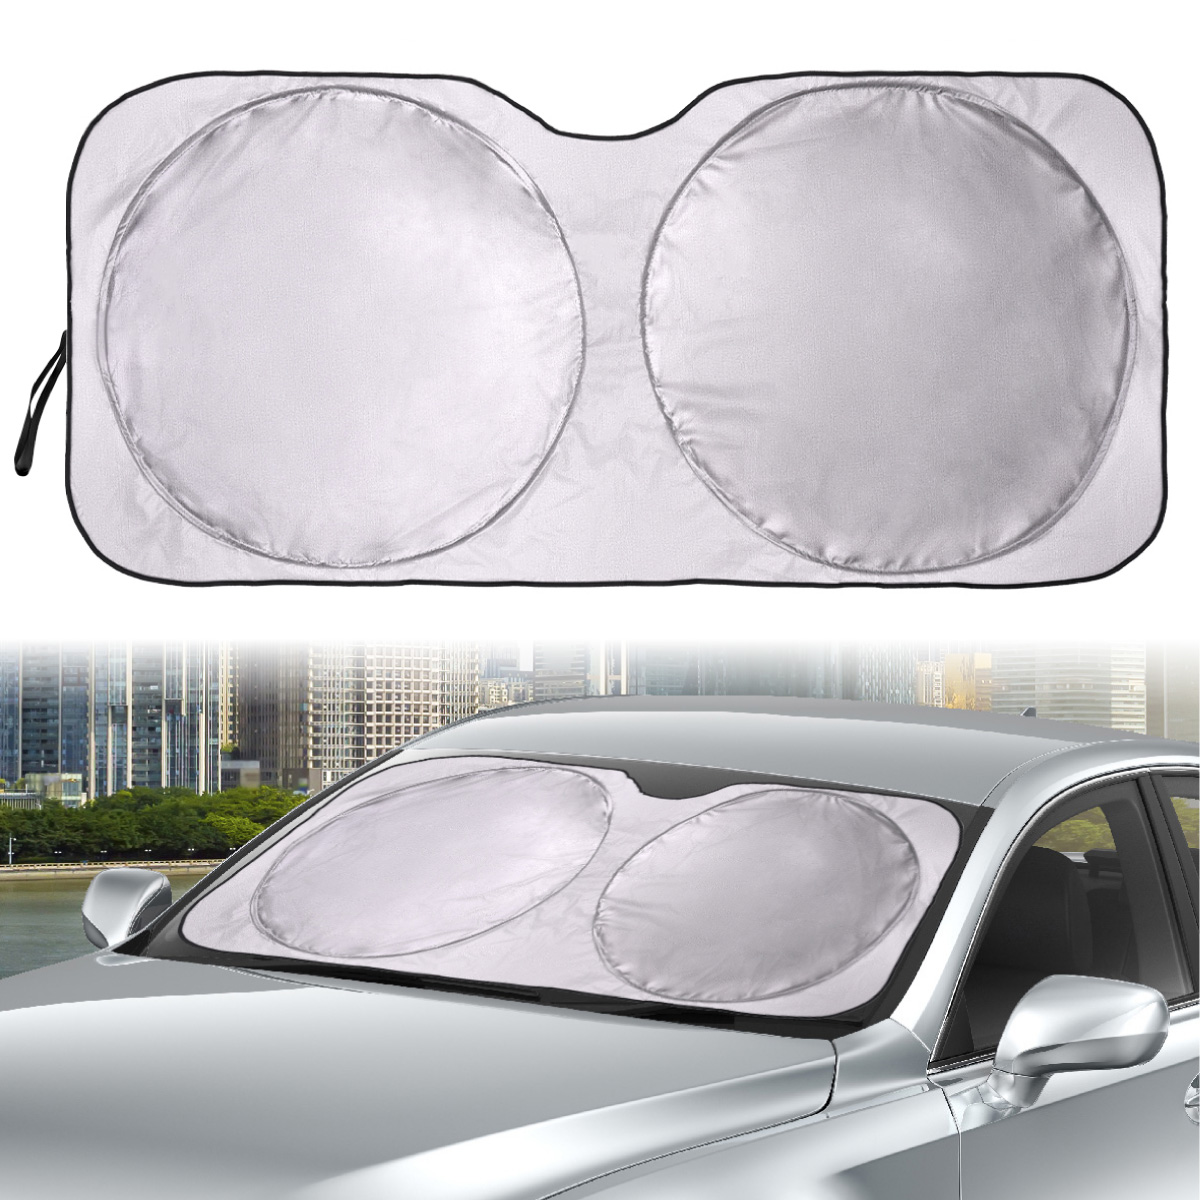 Auto Drive Double Rings Windshield AD22D-83 Twist Sun Shade Pack,  63